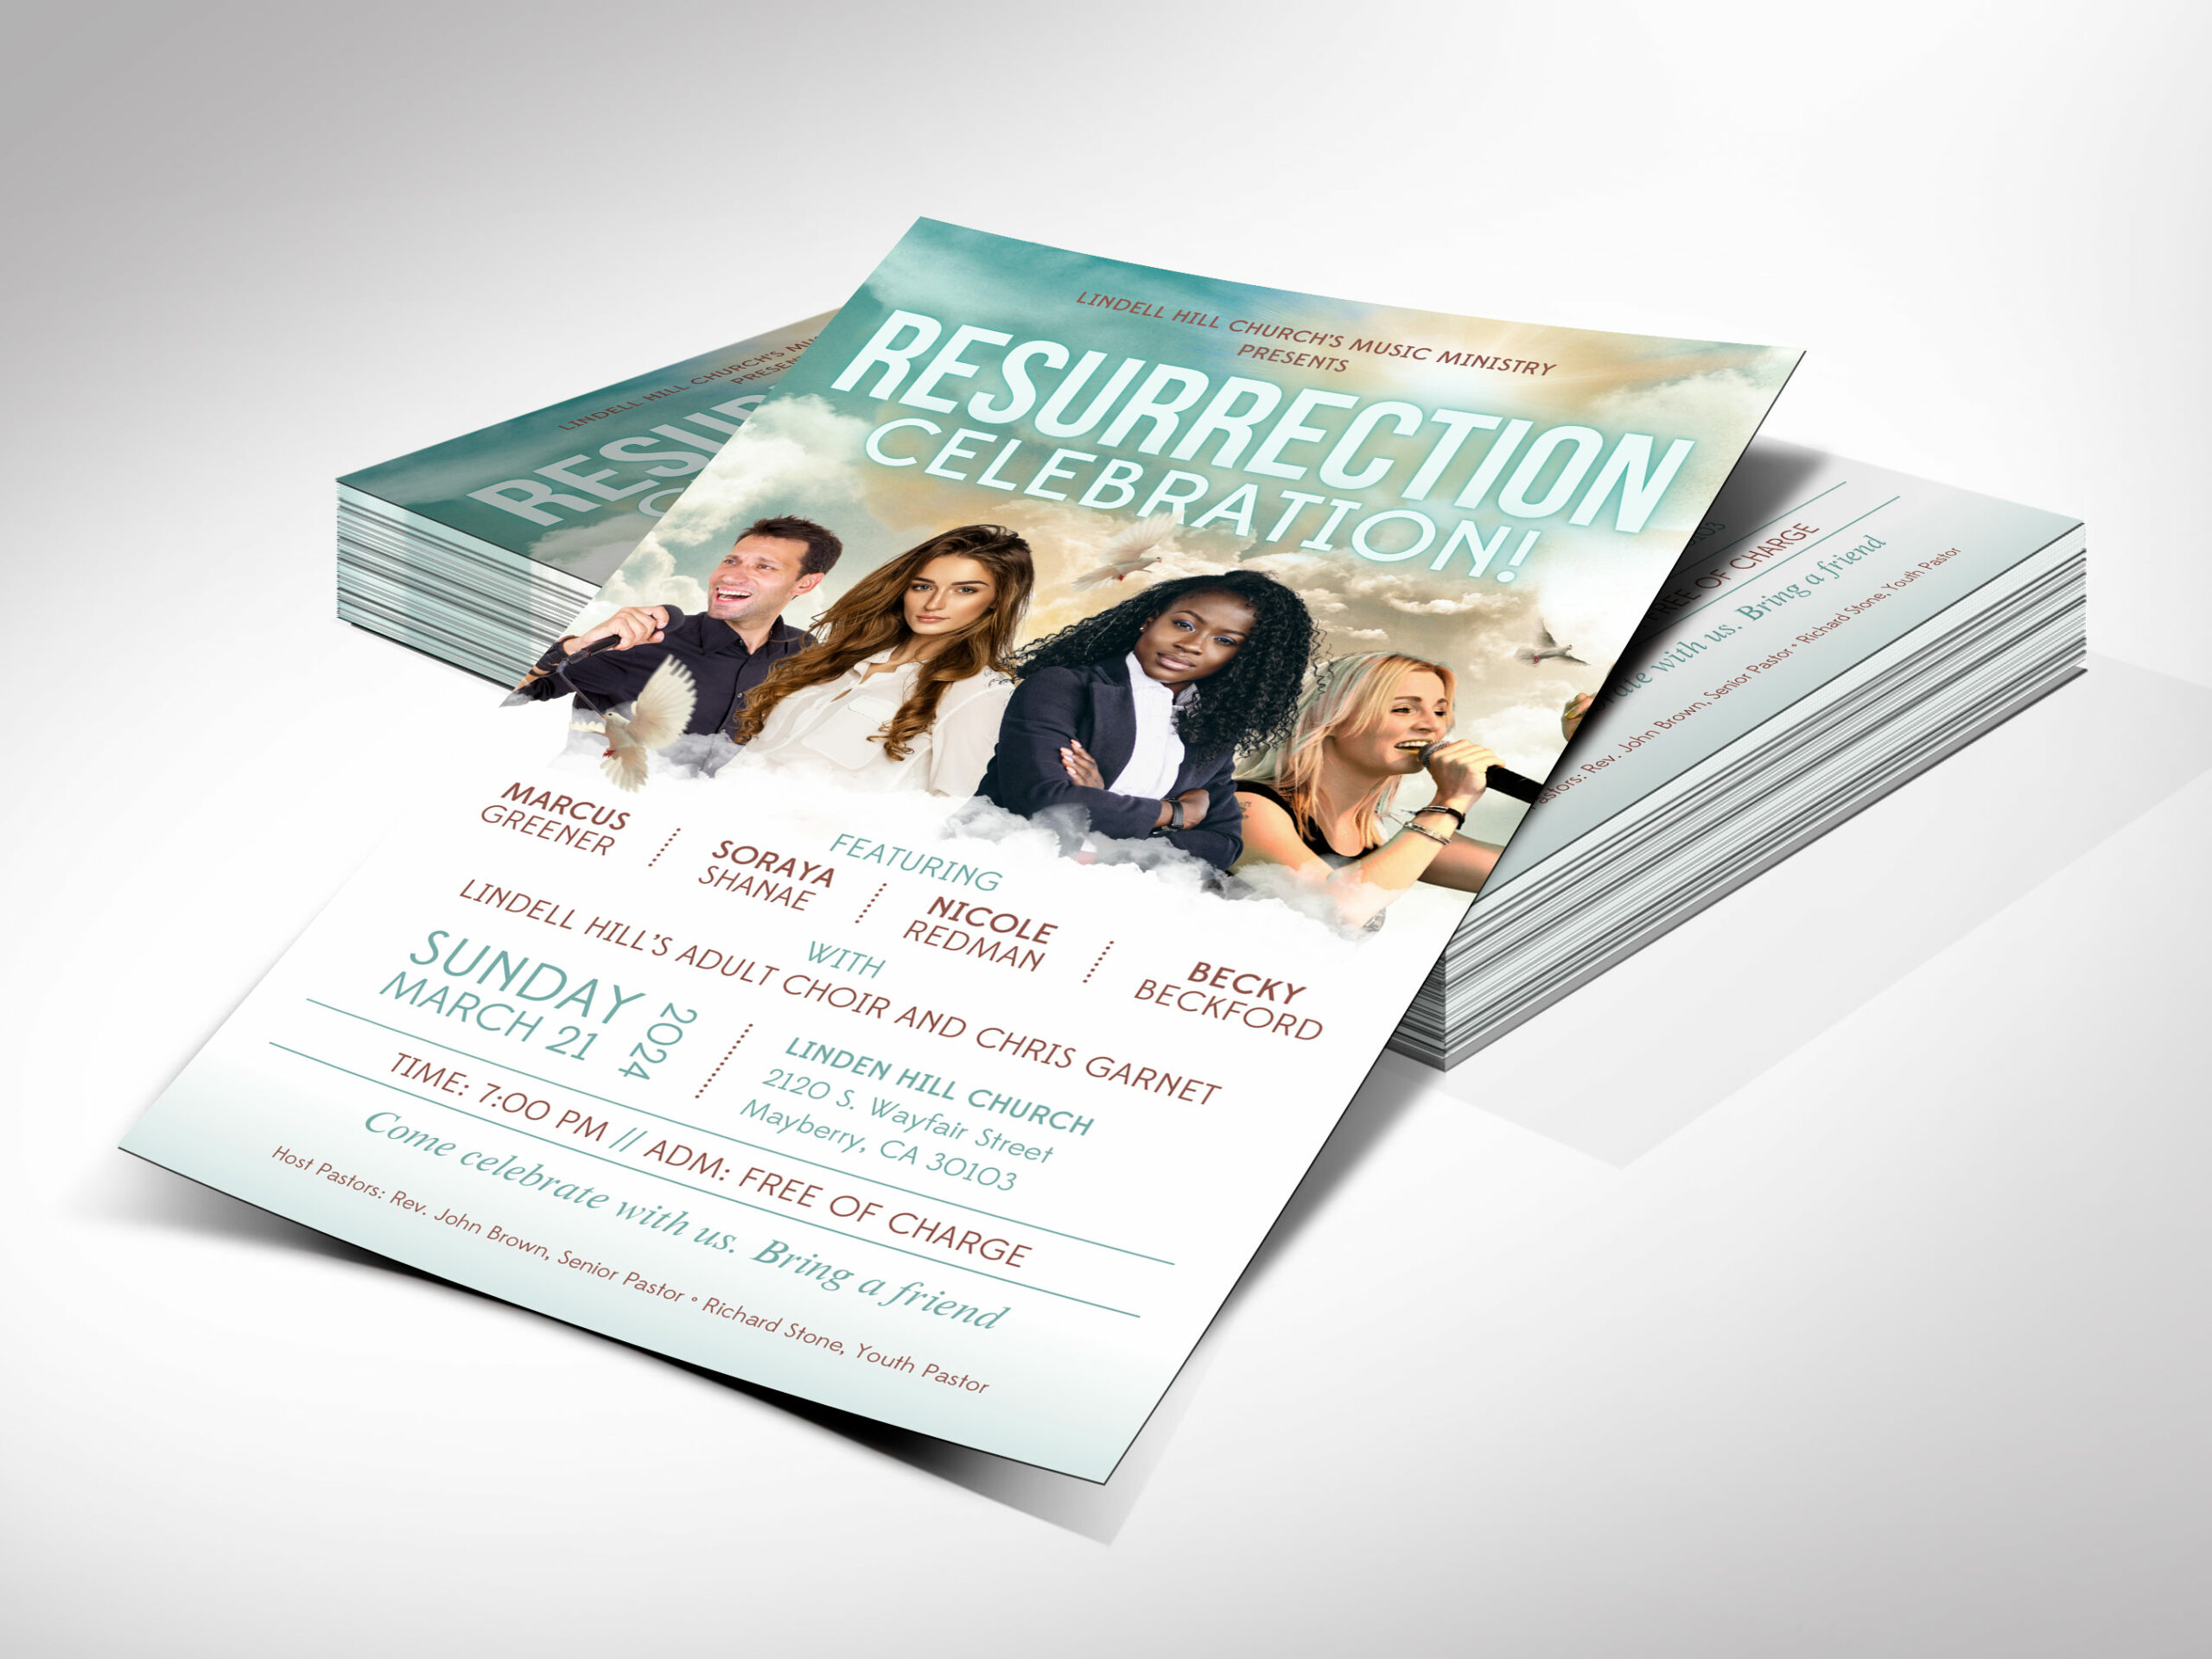 Resurrection Celebration Flyer Template for Canva, Print Size: 5.5x8.5 inches